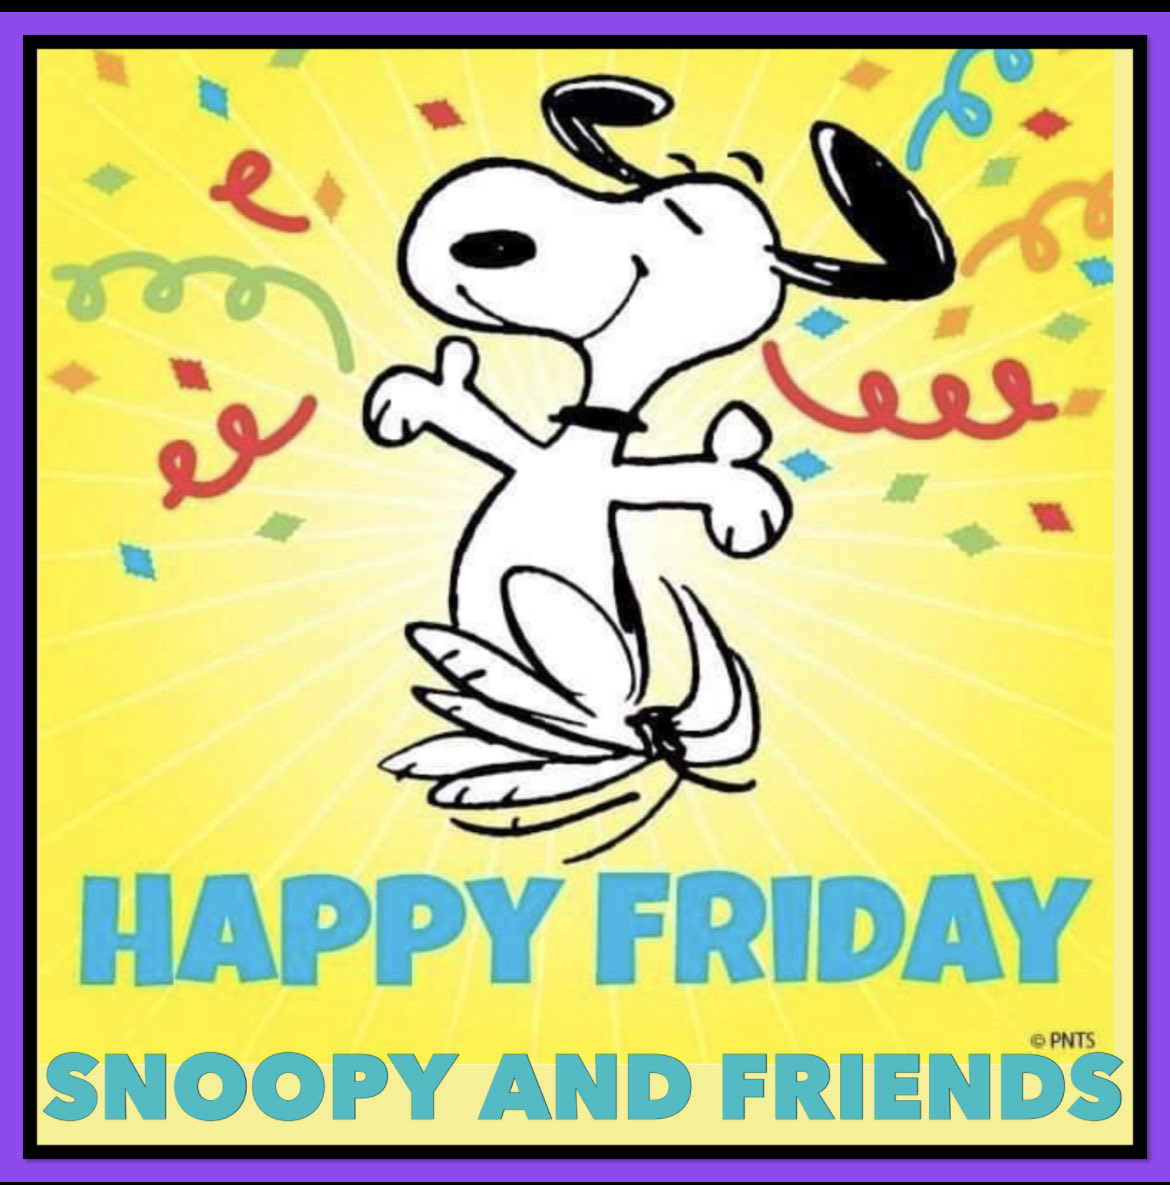 HAPPY FRIDAY SNOOPY AND FRIENDS